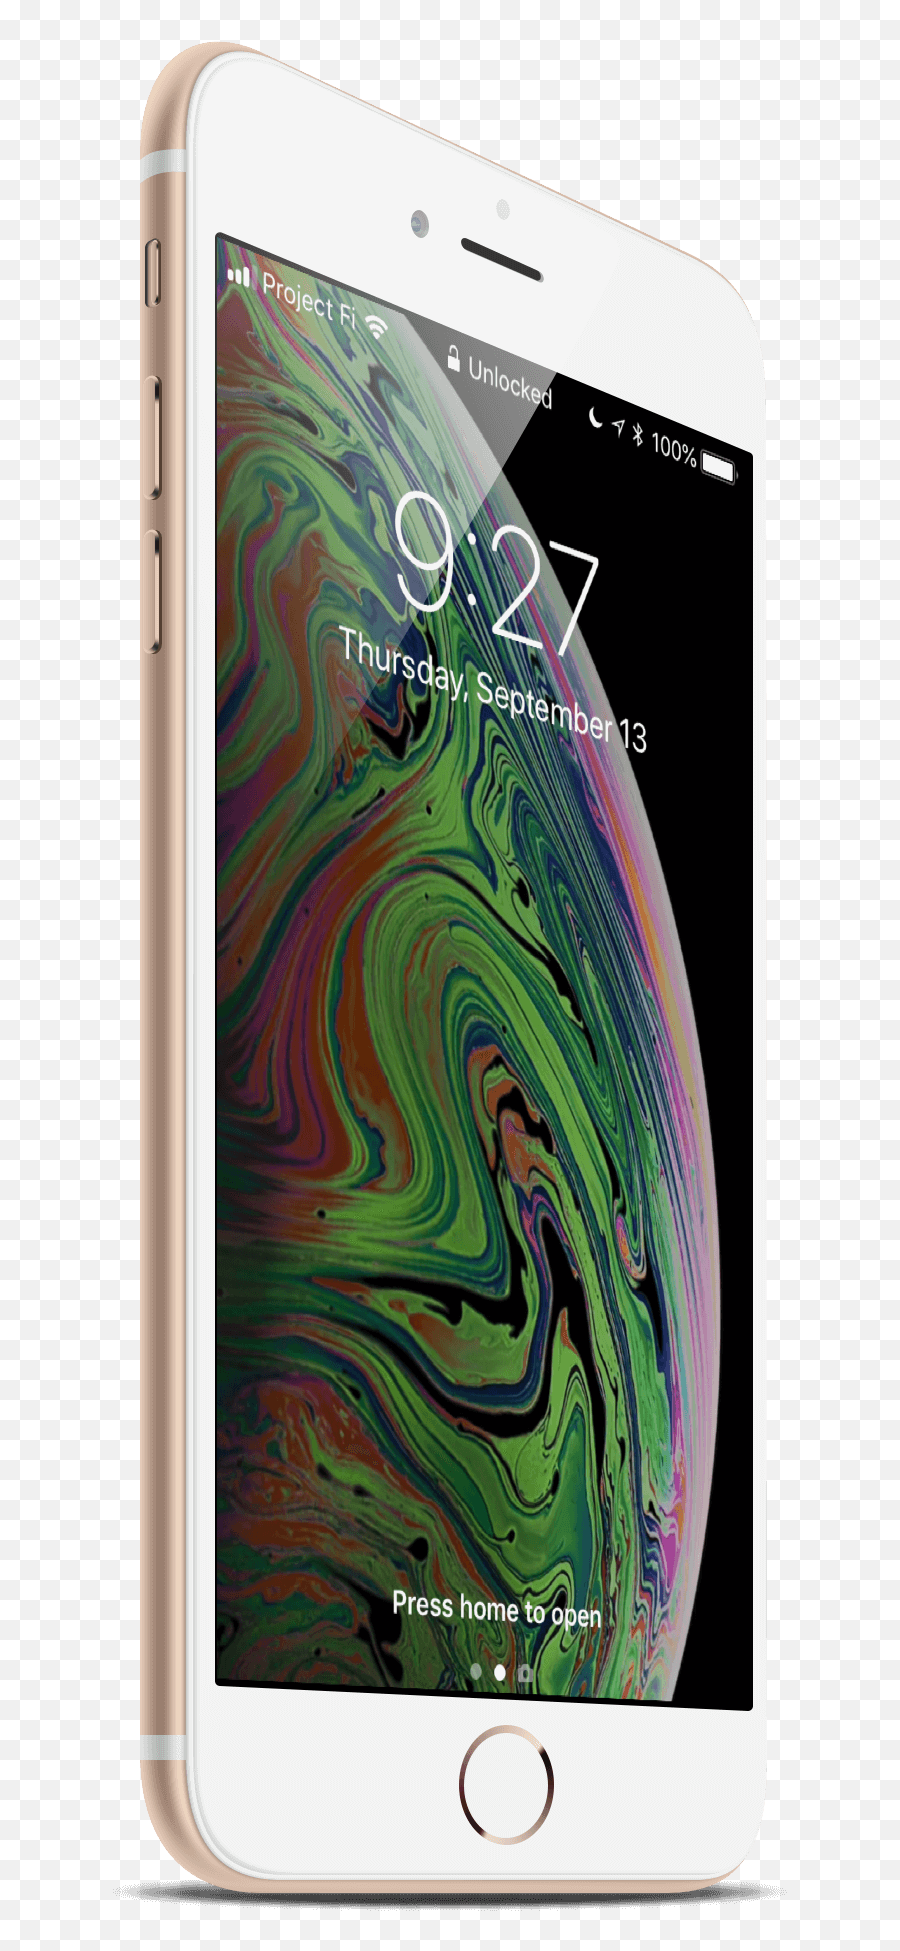 Updated Download The Iphone Xs And Iphone Xr Wallpapers - Camera Phone Emoji,Apple Iphone Logo Wallpaper